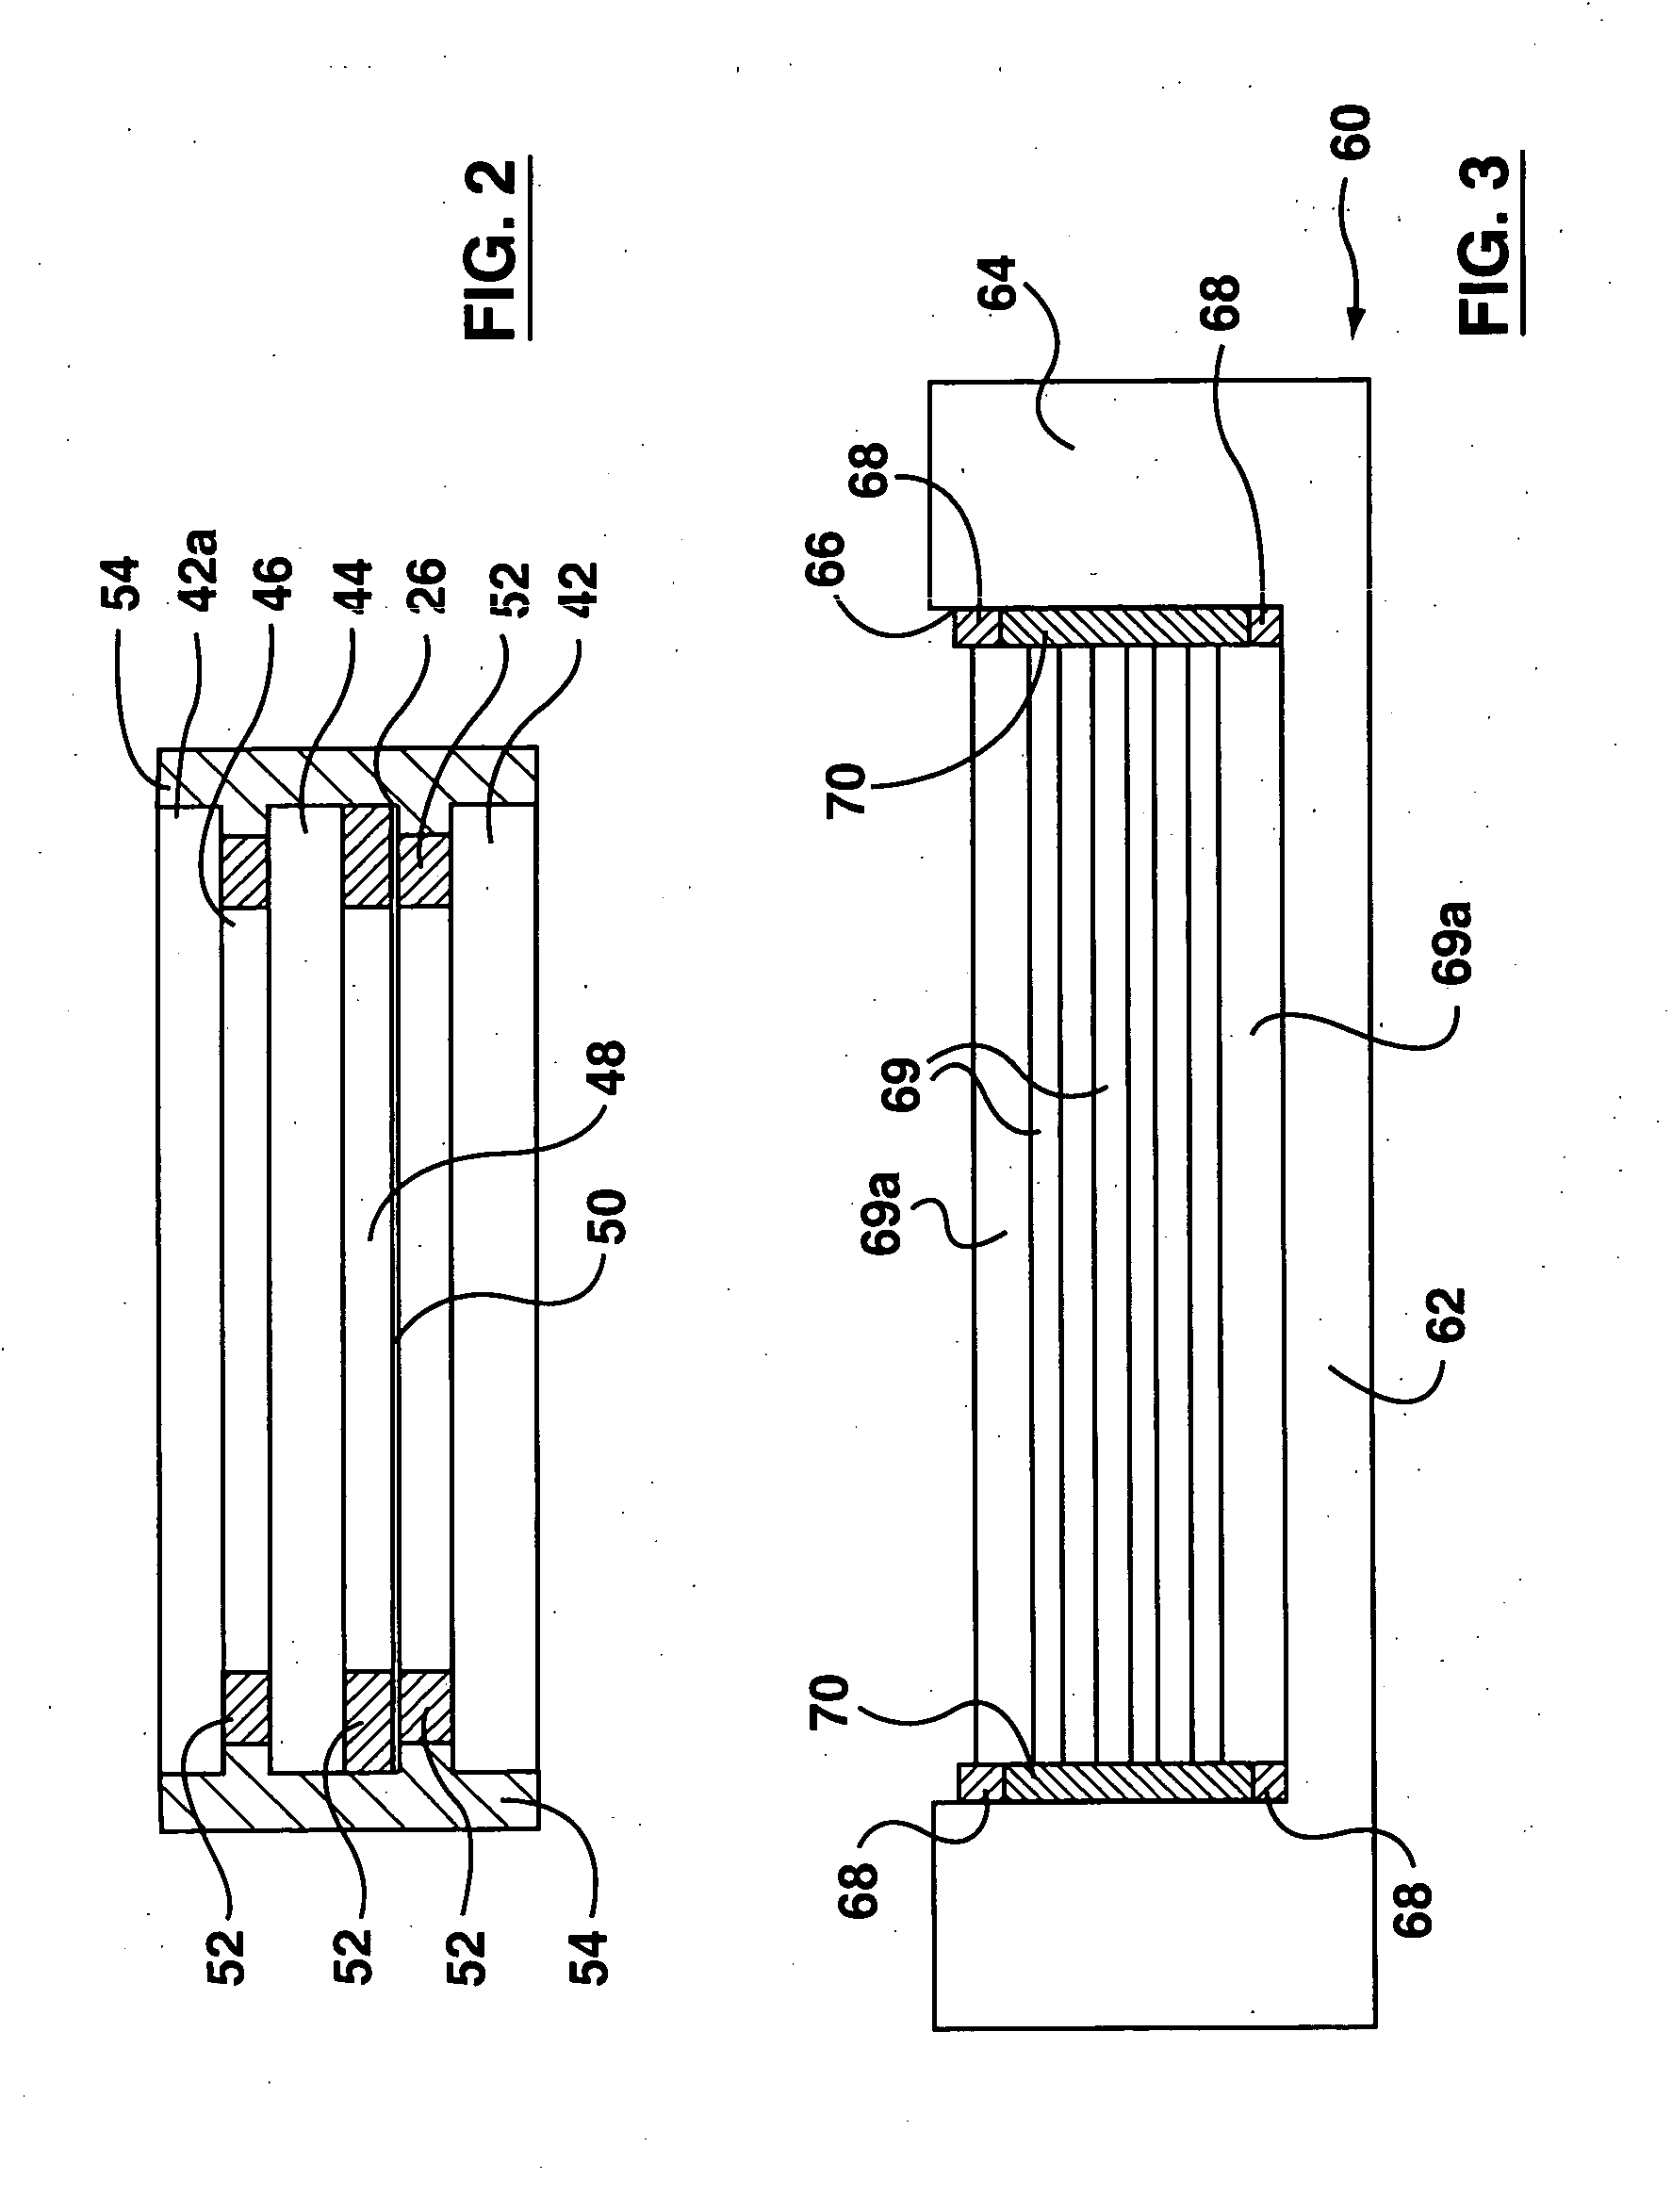 Apparatus for and method of forming seals in fuel cells and fuel stacks